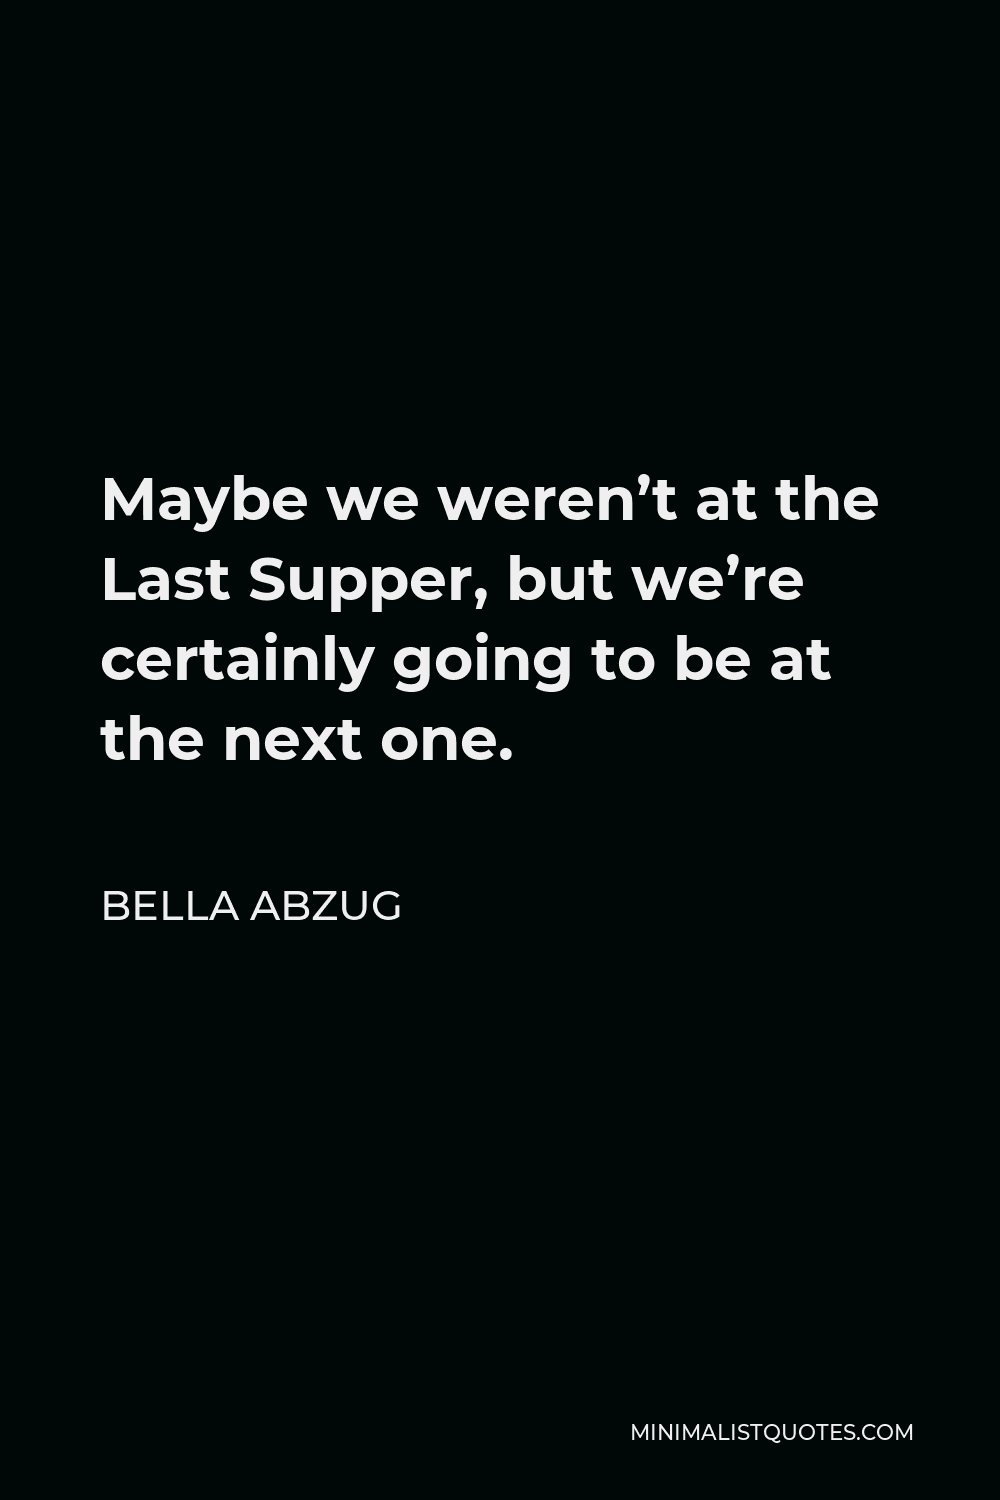 Bella Abzug Quote - Maybe we weren’t at the Last Supper, but we’re certainly going to be at the next one.